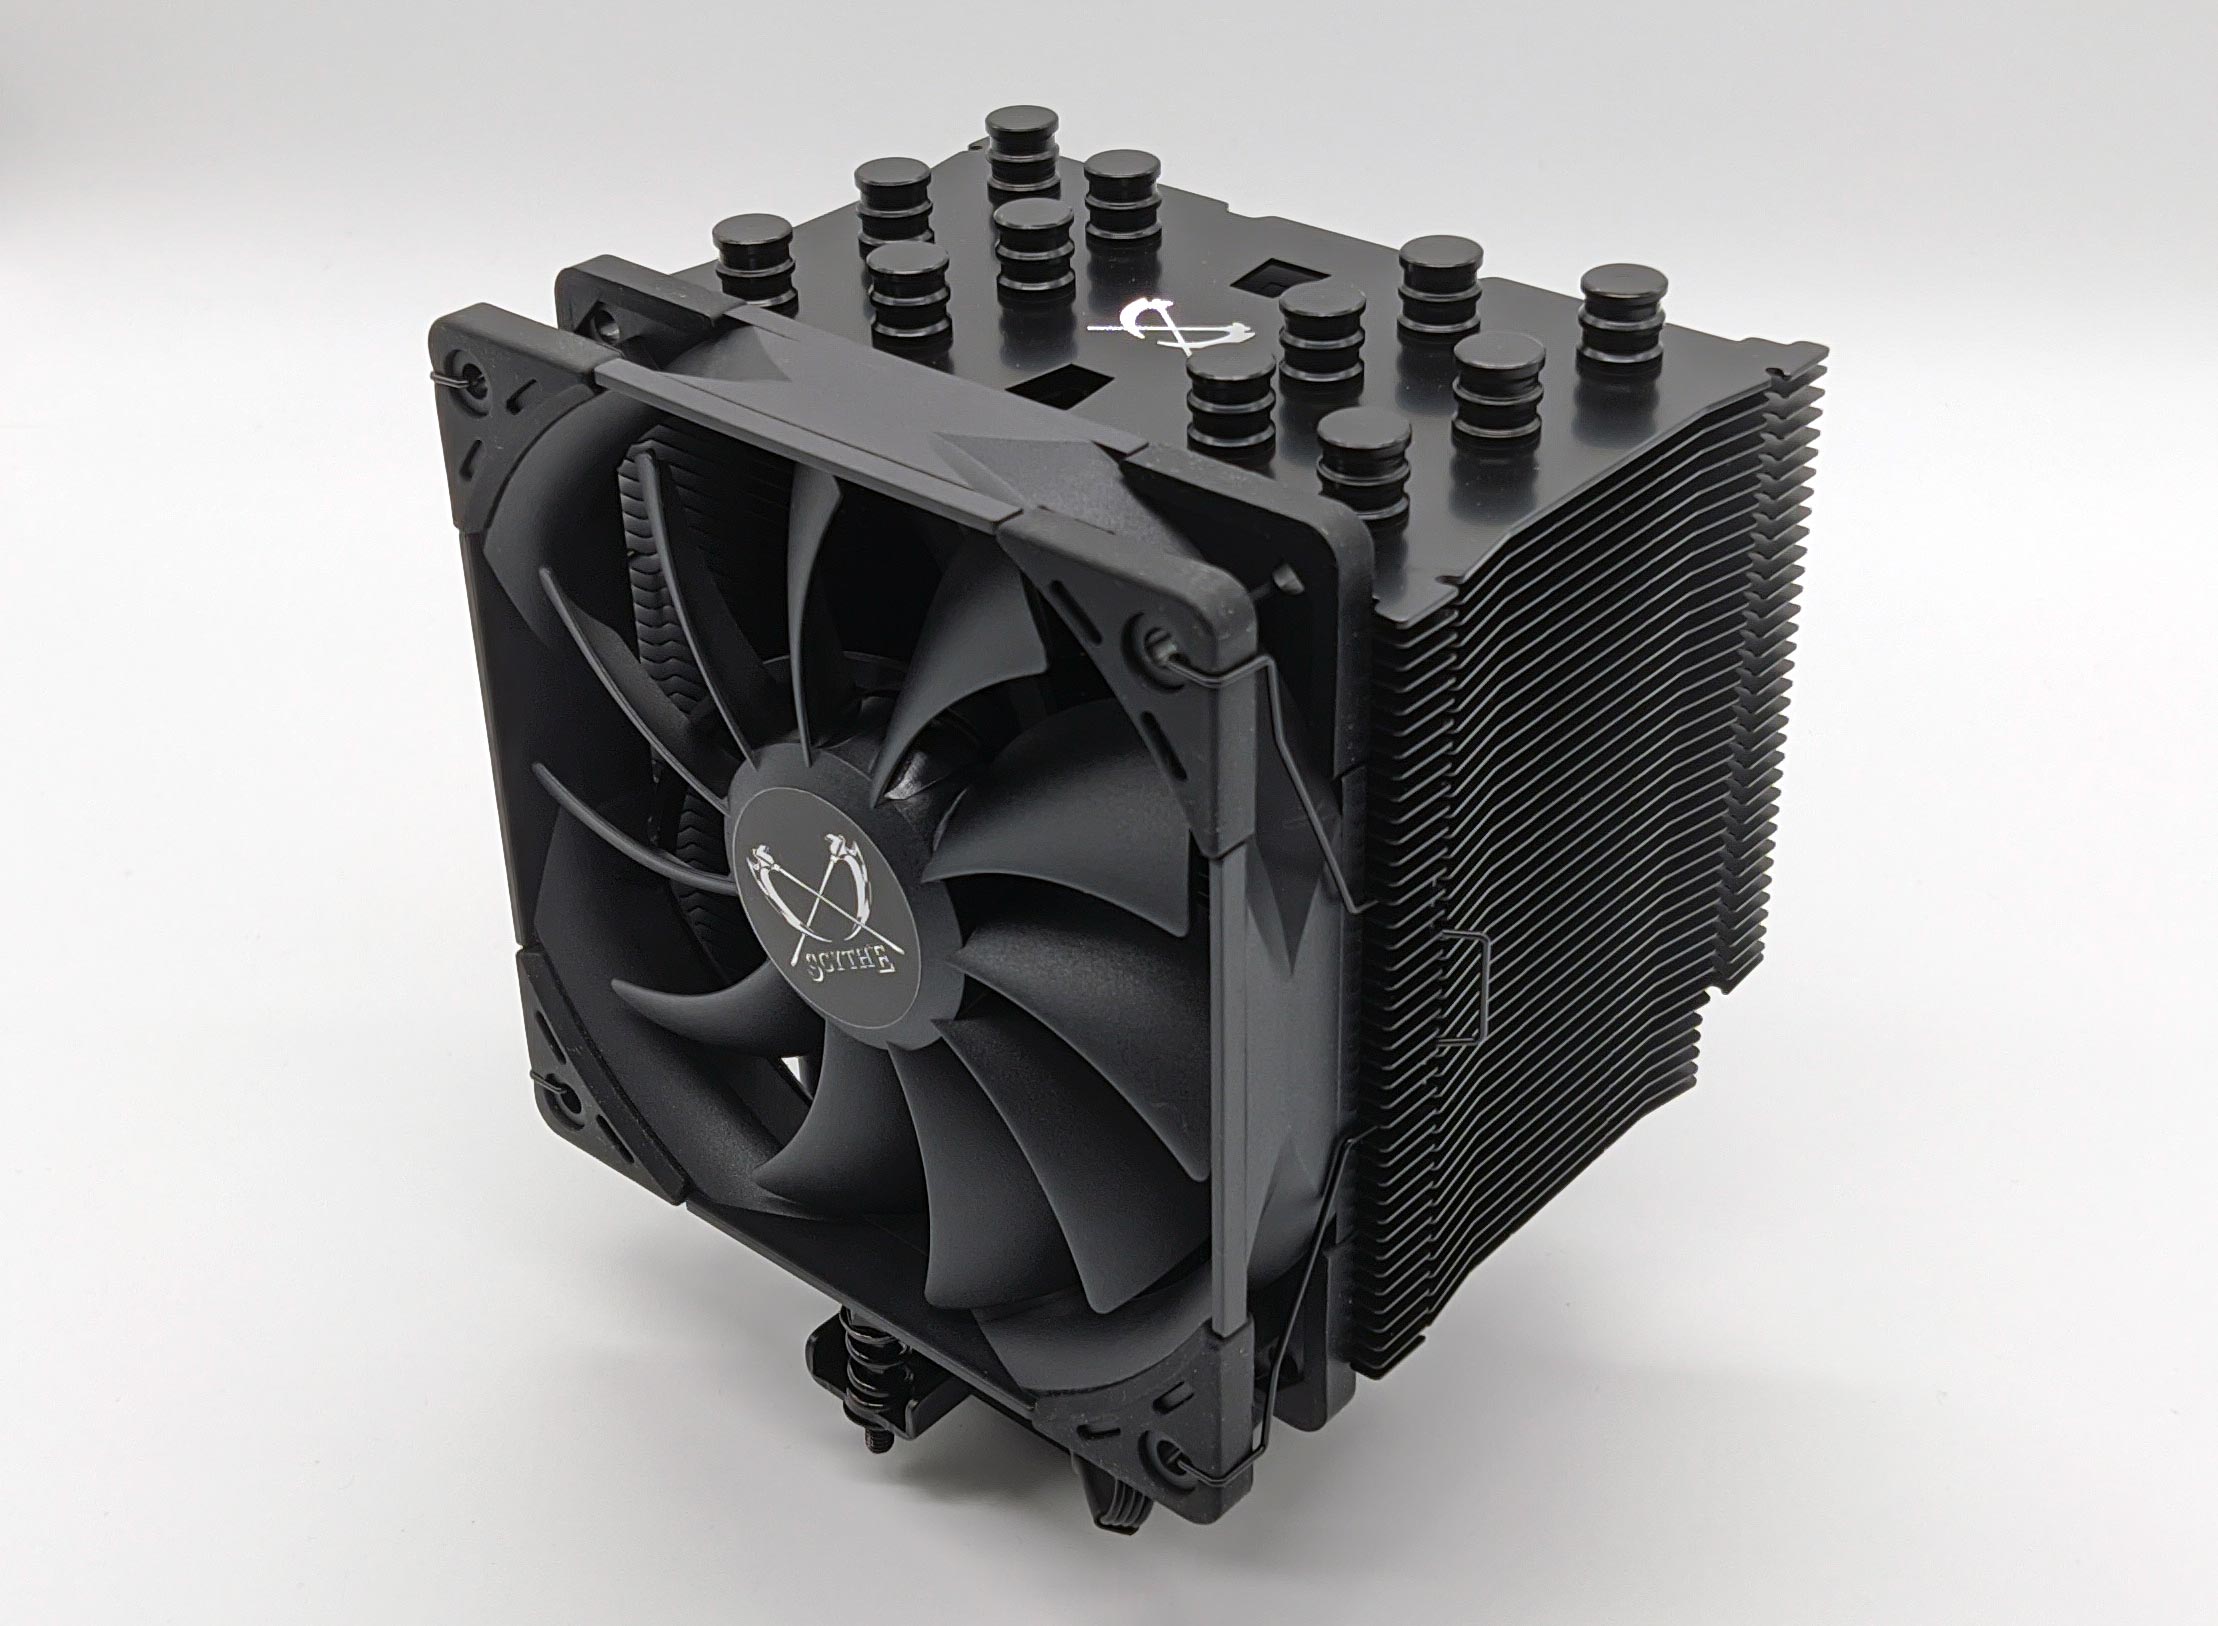 Scythe Mugen 5 Black Edition in the test - disappointing paintwork of the CPU cooler